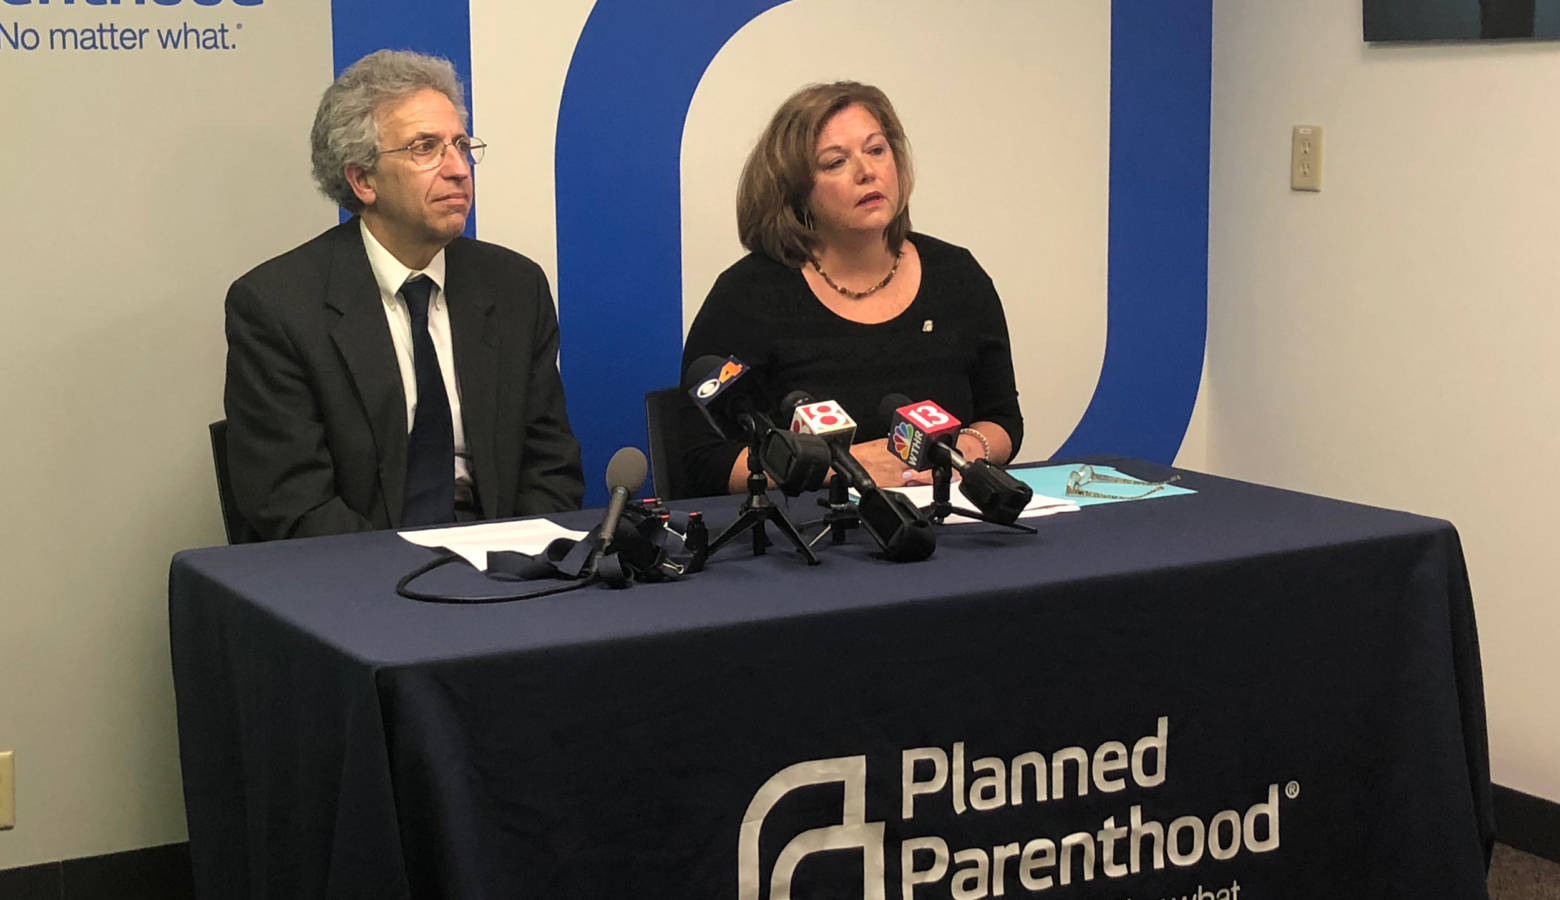 ACLU of Indiana Legal Director Ken Falk (left) and Planned Parenthood of Indiana and Kentucky CEO Christie Gillespie (right) discuss a federal judge halting Indiana's abortion reporting law. (Sarah Panfil/WFYI)